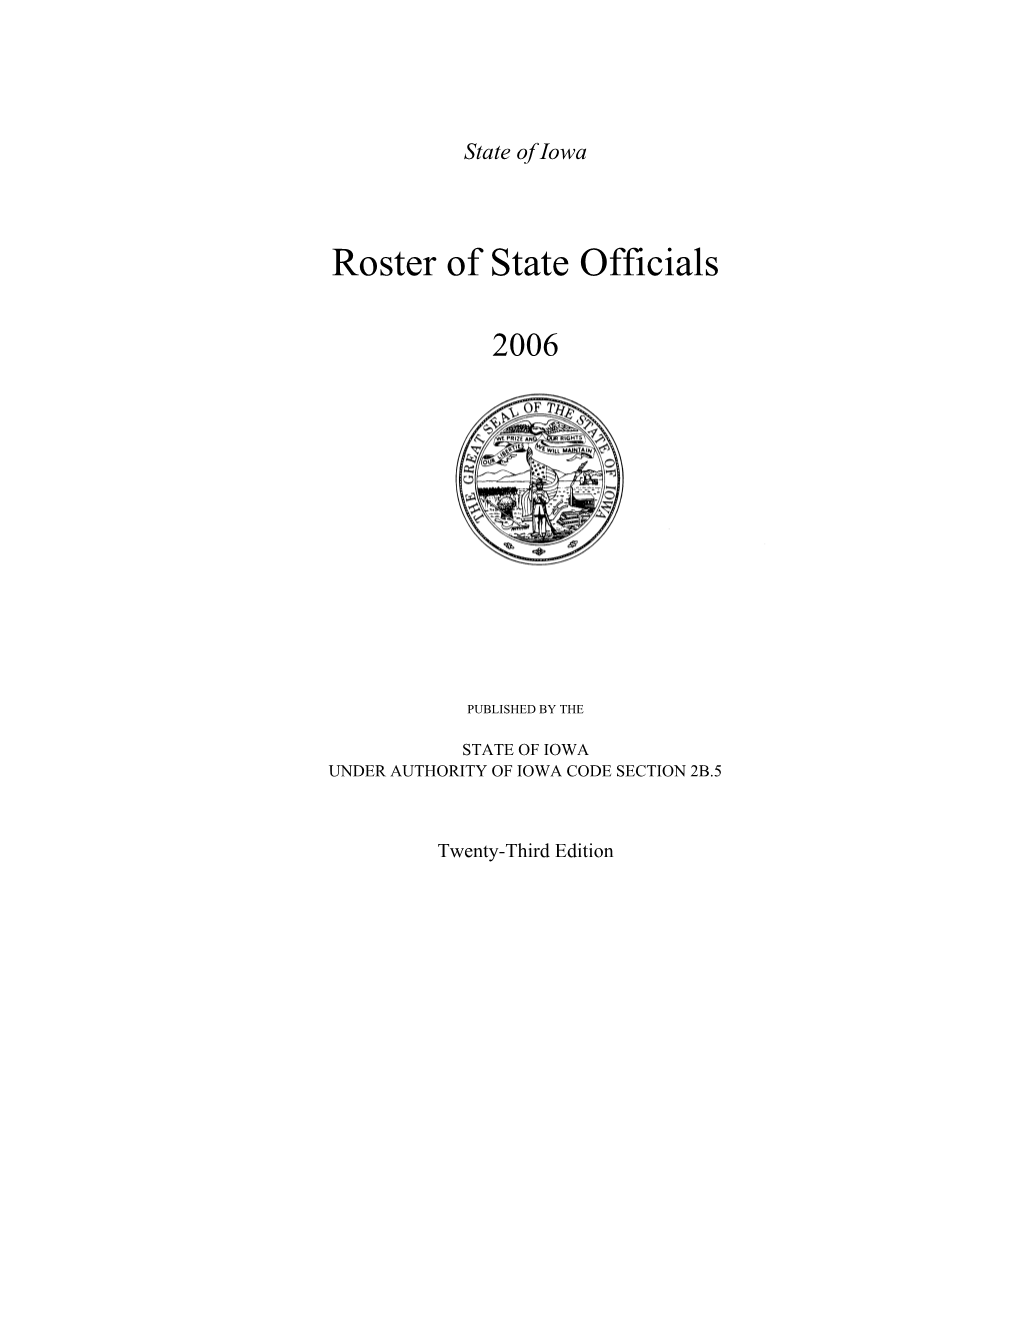 Roster of State Officials